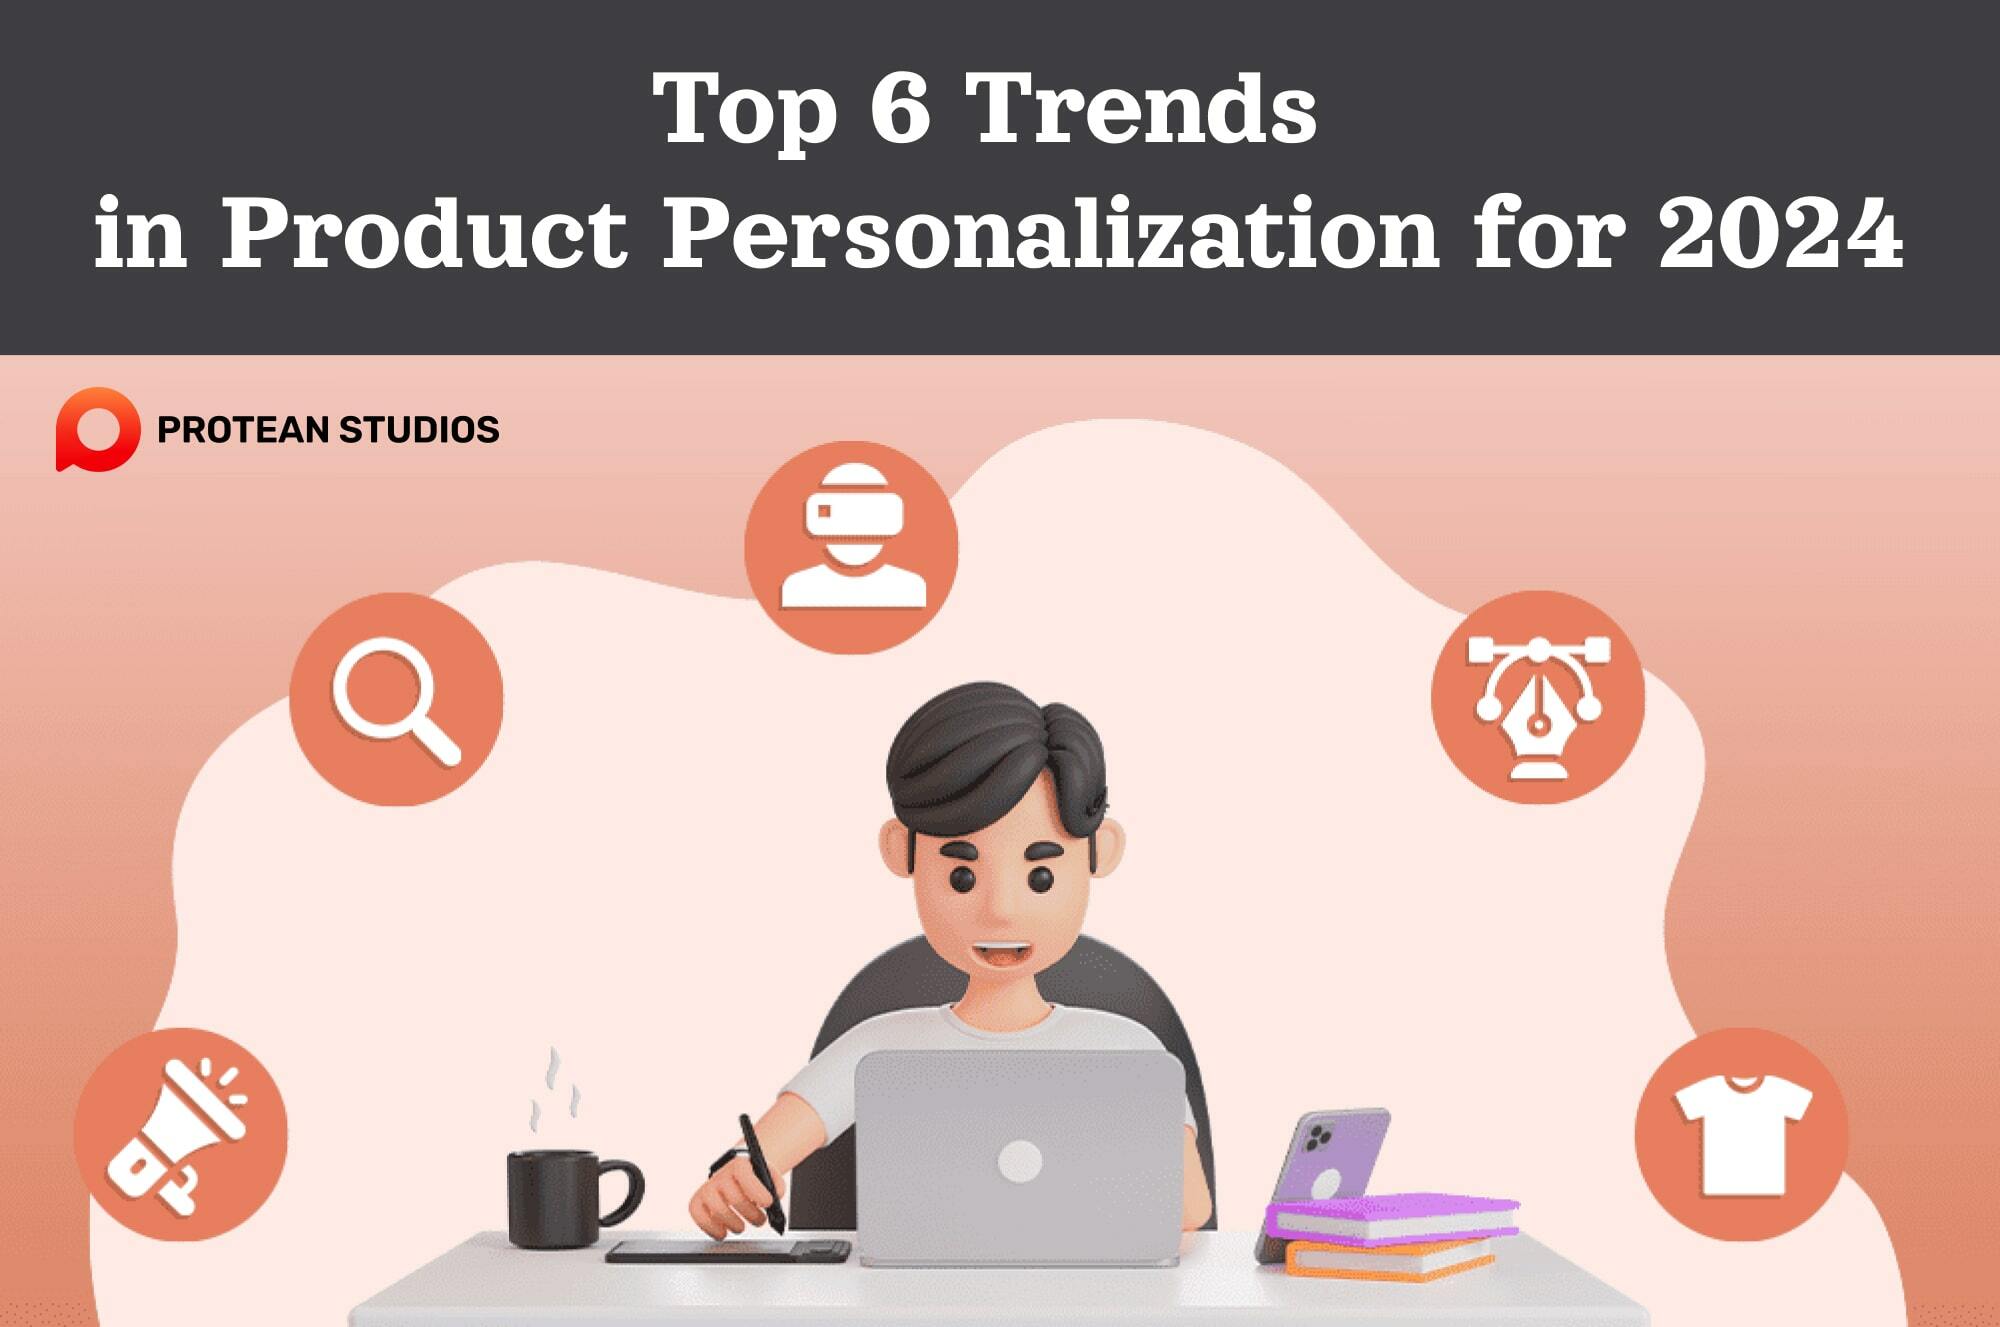 Top trends for using product personalization